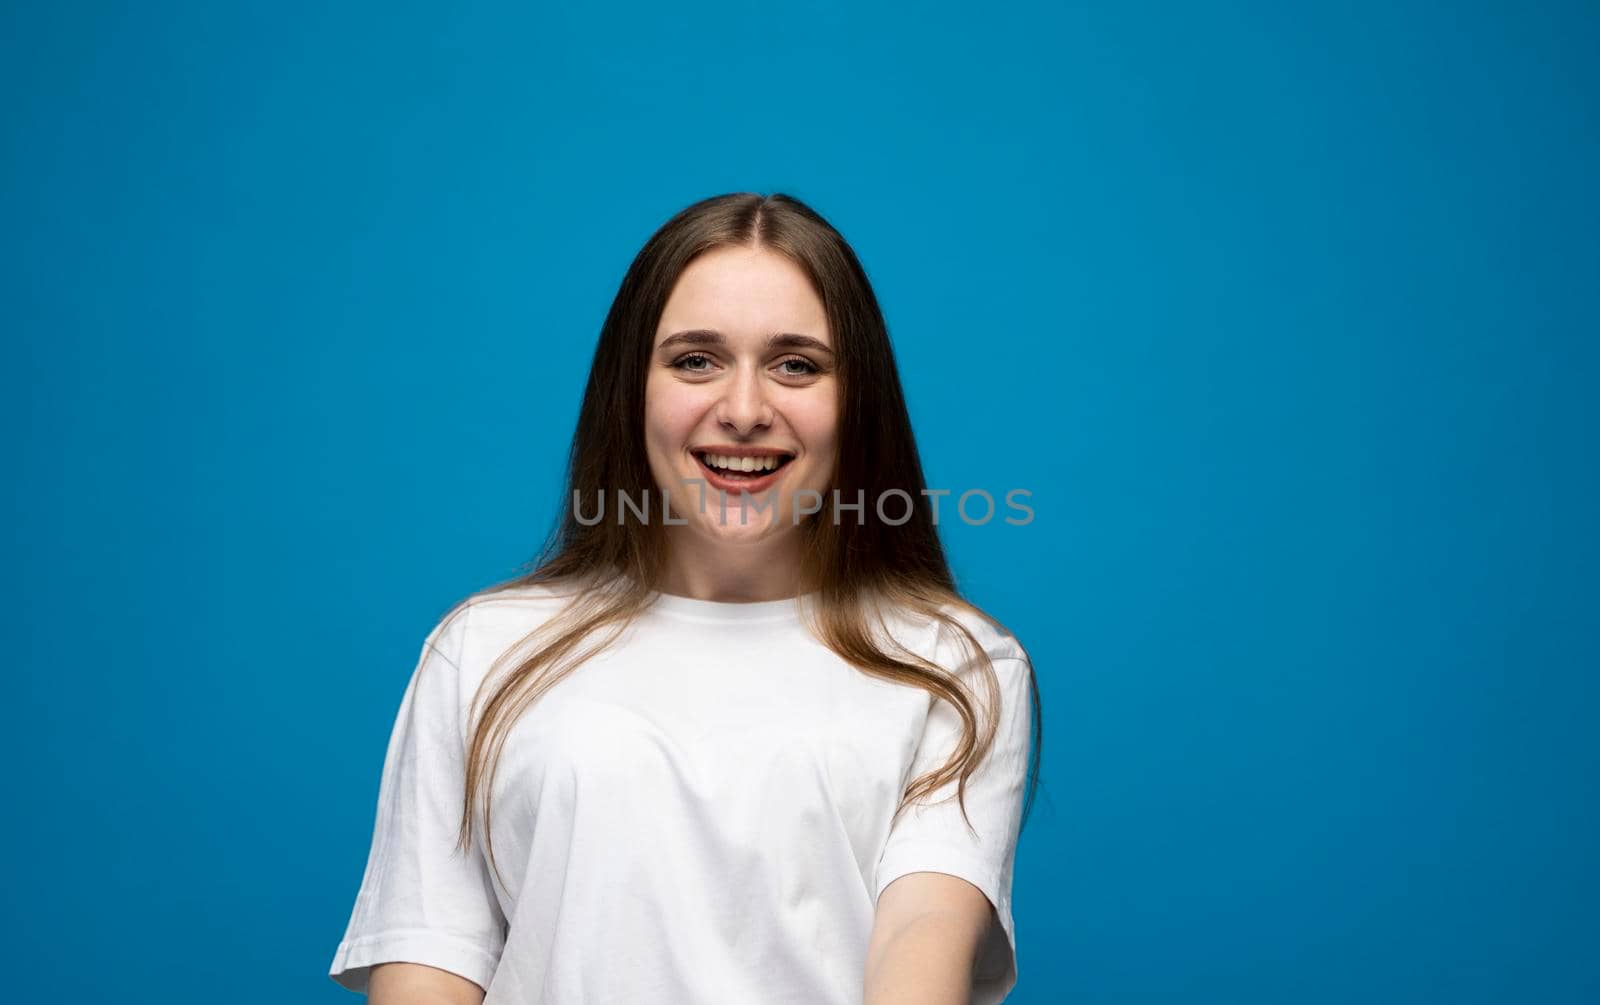 Attractive woman with long hair being very glad smiling with broad smile showing her teeth and having fun indoors. Joyful excited cheery female